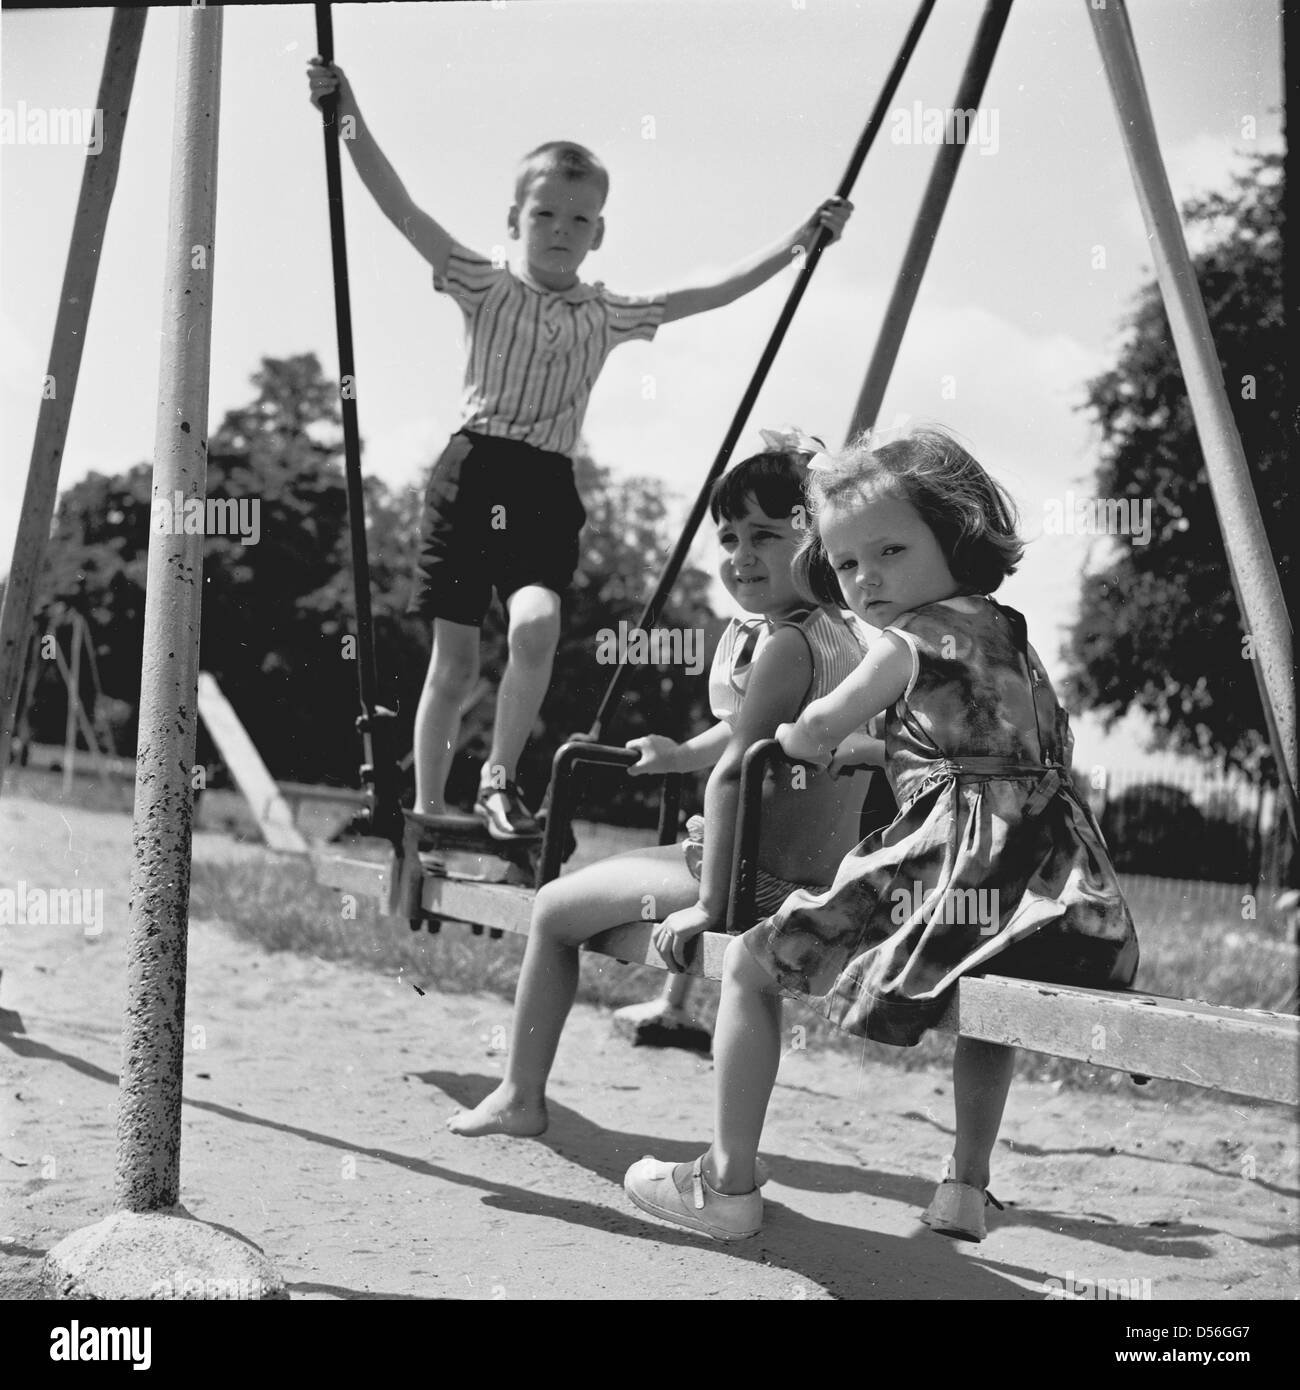 Historical, 1950s.England, summertime and three small children together ...